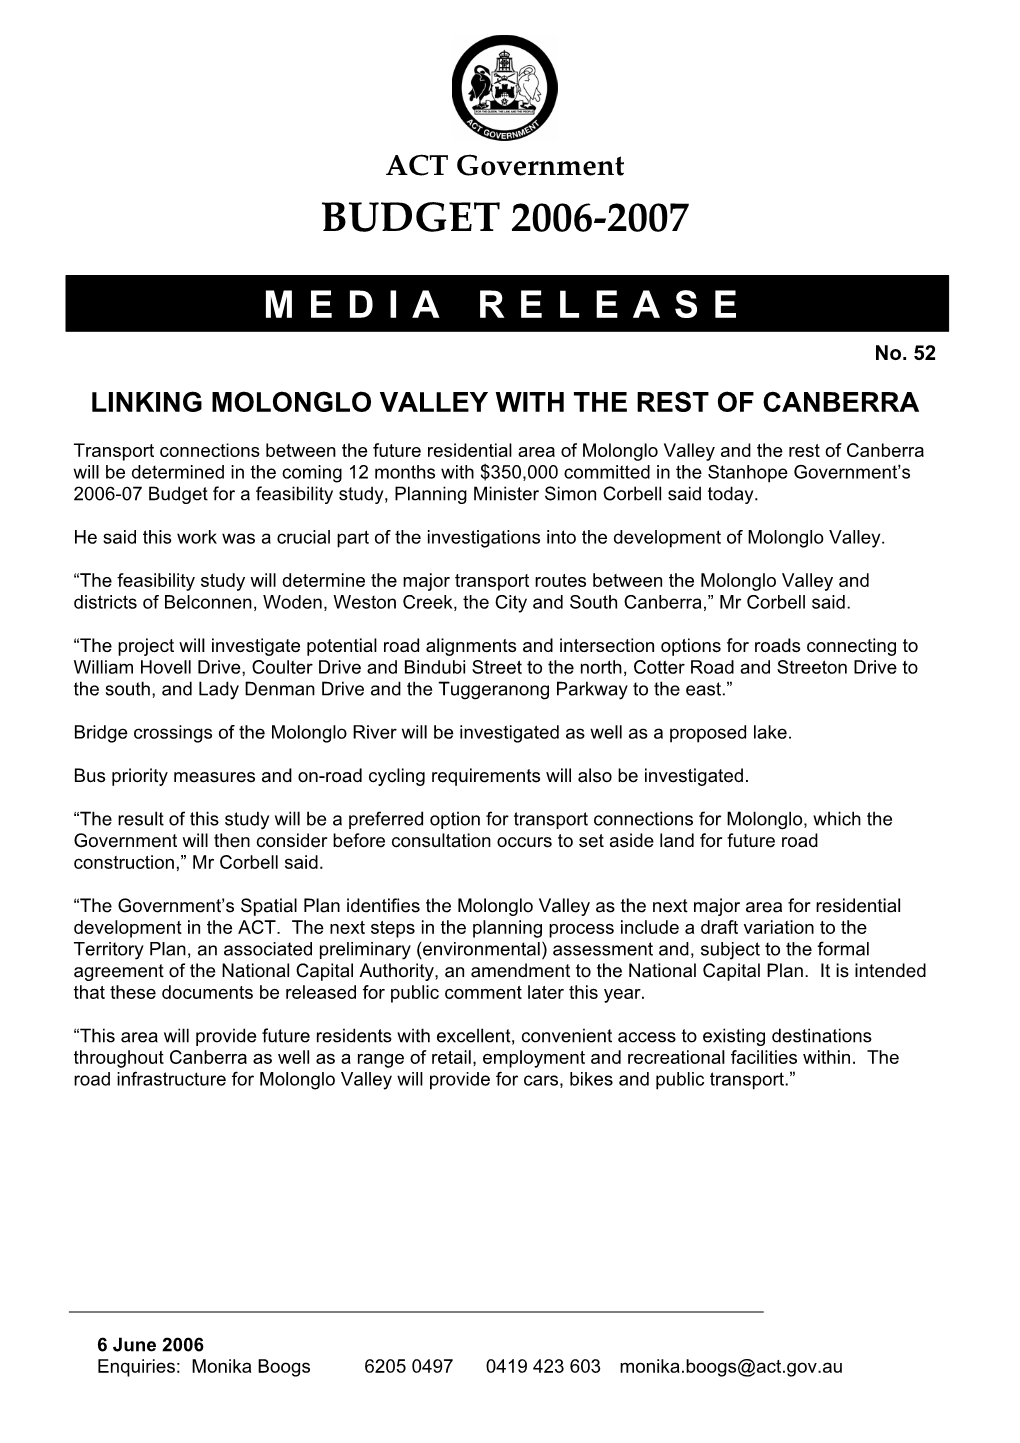 Linking Molonglo Valley with the Rest of Canberra